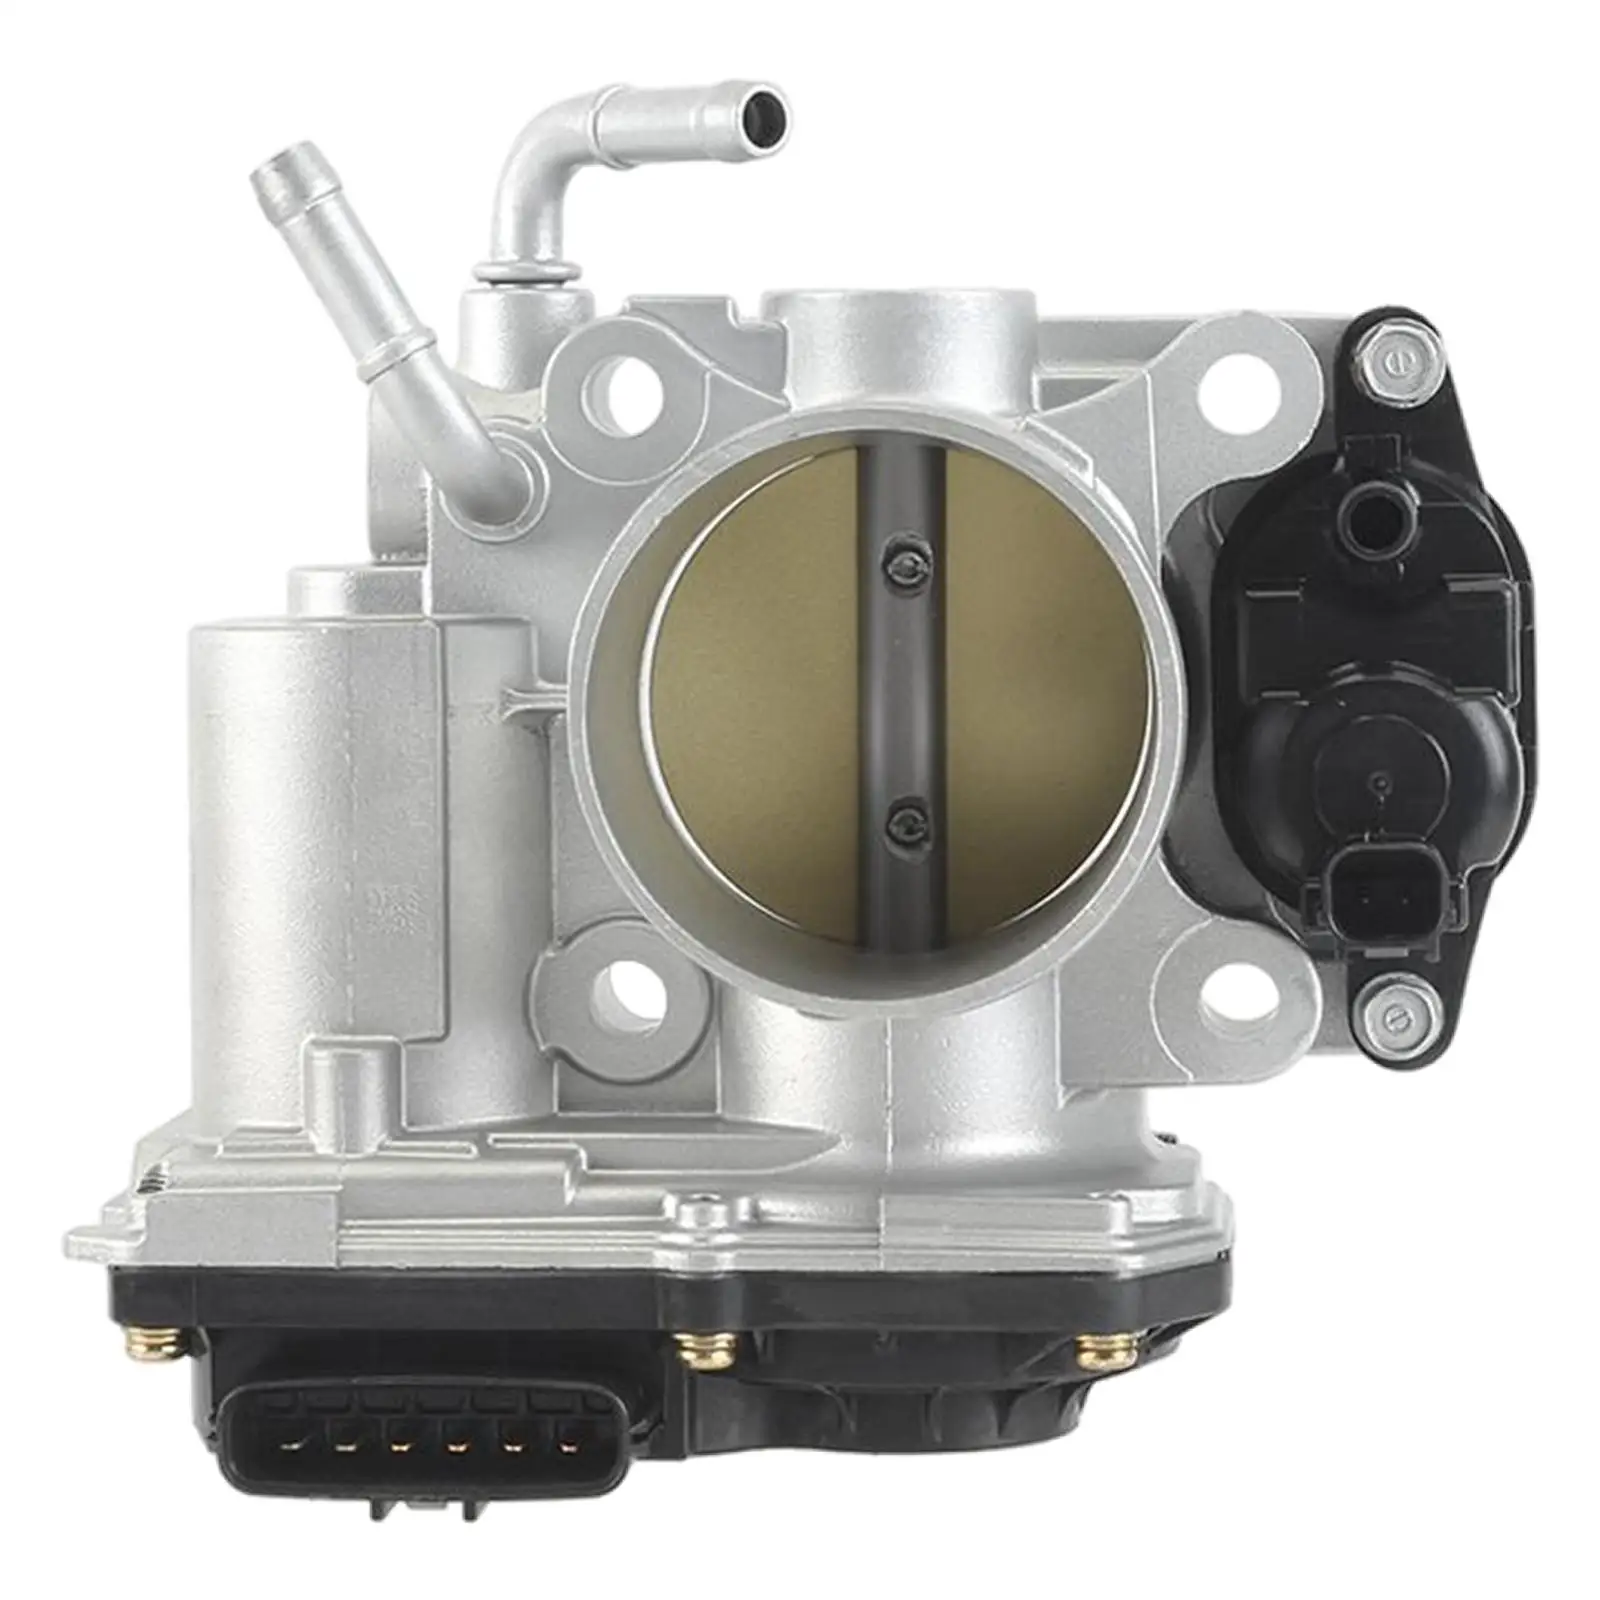 Throttle Body Replacement Parts 16400-Rnb-A01 Engine Accessories Fuel Injection Fit for Honda Civic 1.8L 2006-2011 R18 EX Lxs